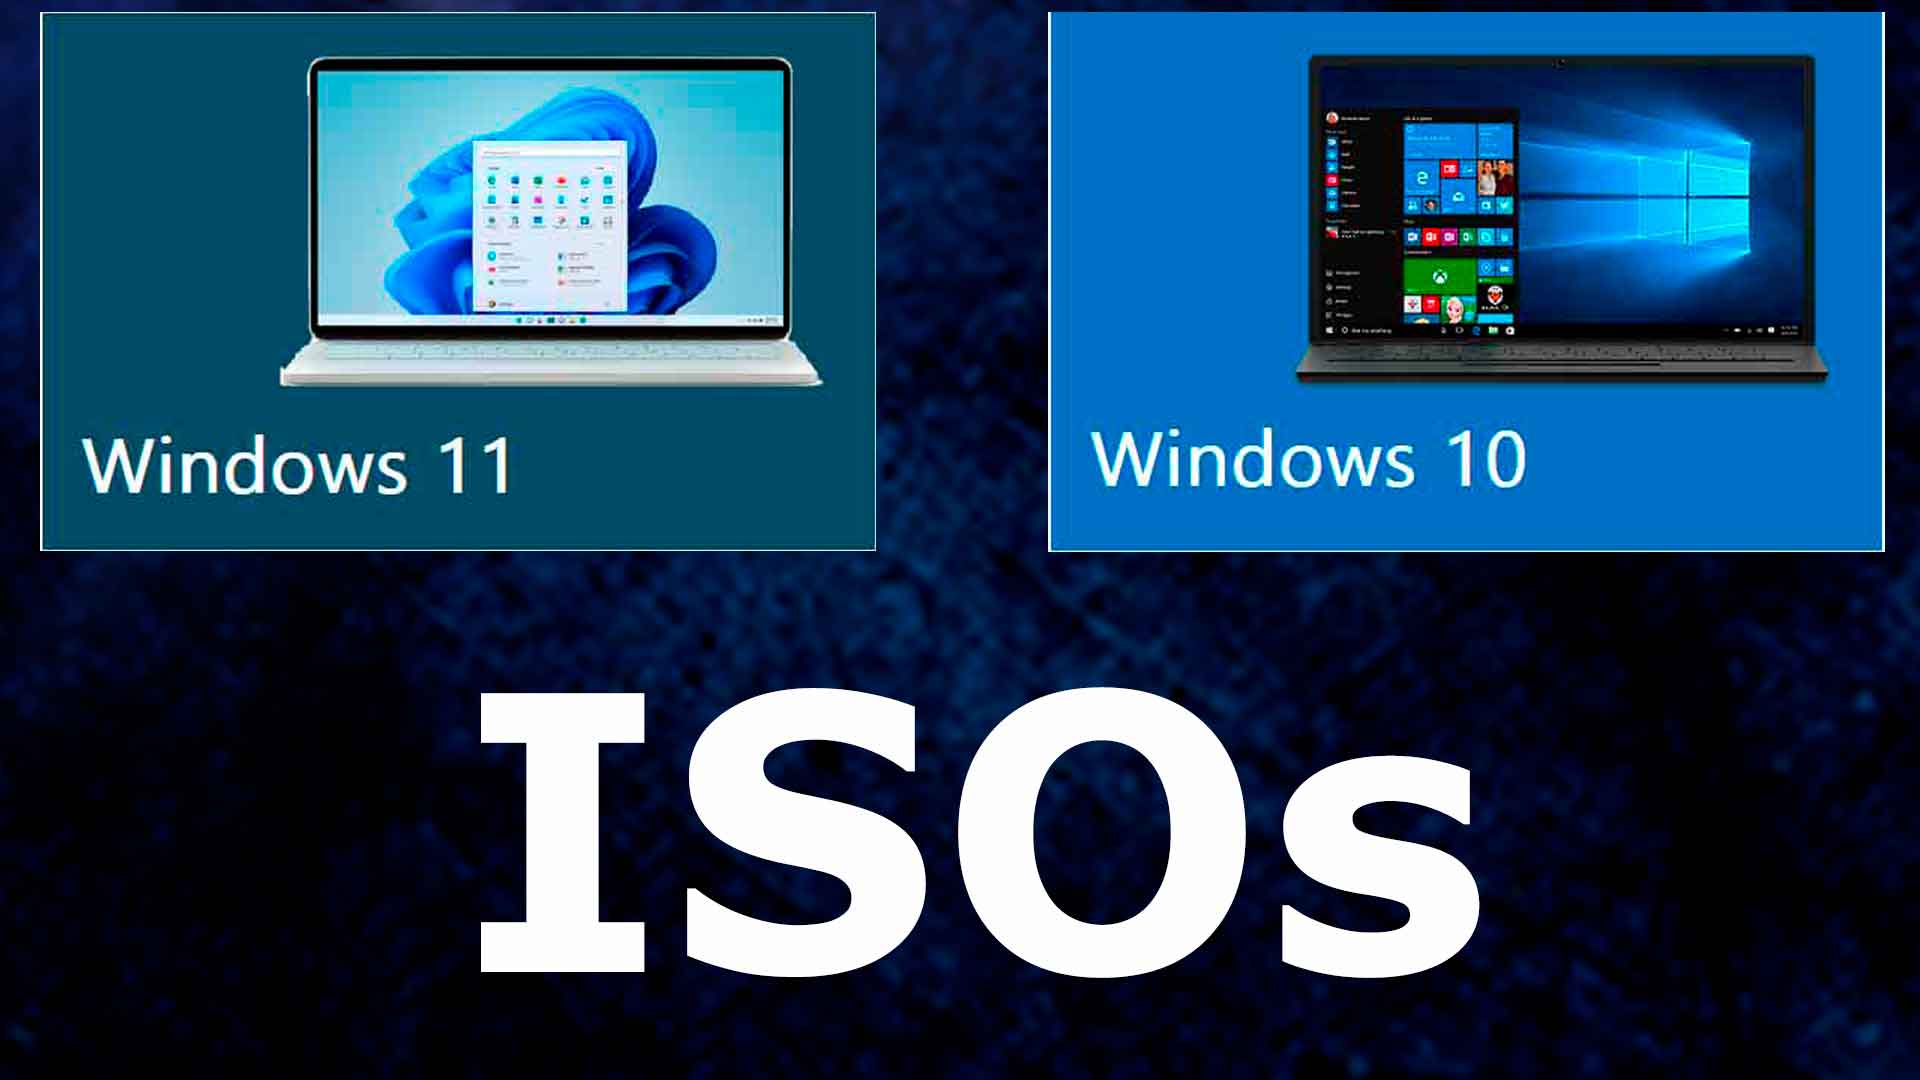 How to download installation ISO files for Windows 11 and 10?